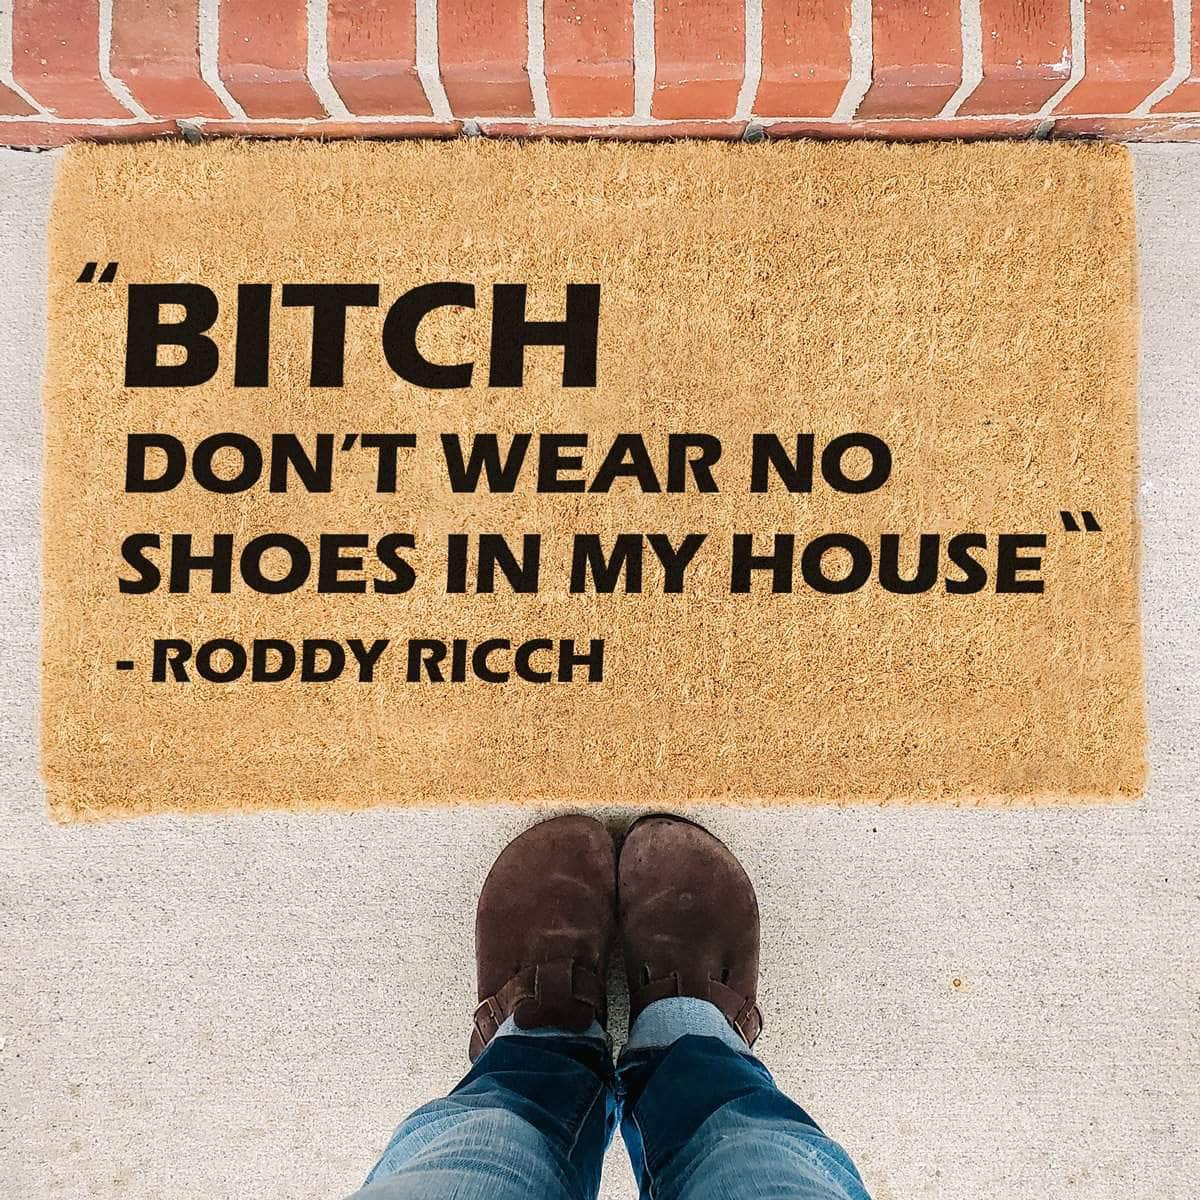 Bold Bitch Don't Wear No Shoes In My House - Roddy Ricch Doormat